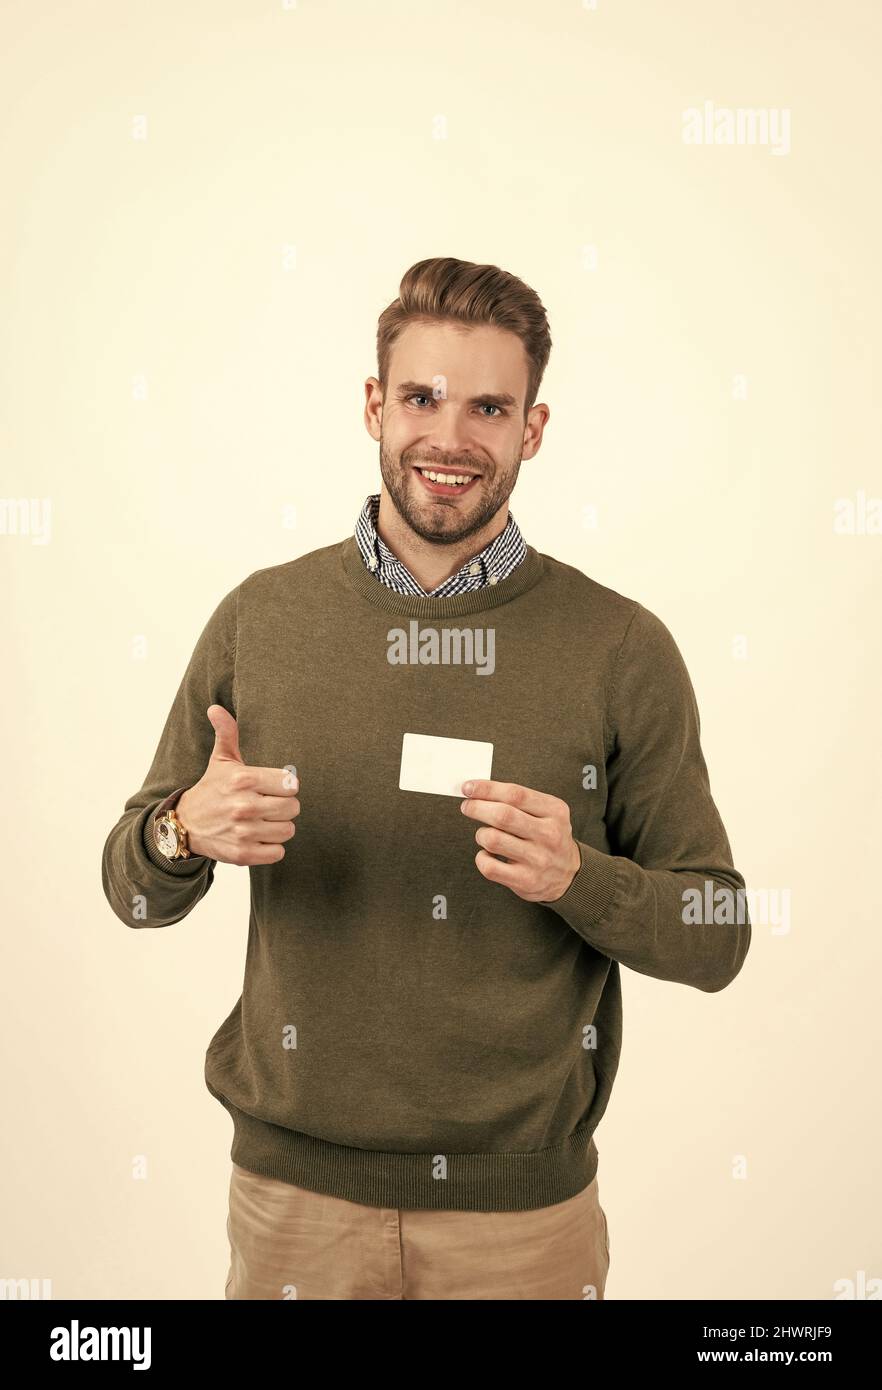 businessman show business card. unshaven business man demonstrating. call me. identification. Stock Photo